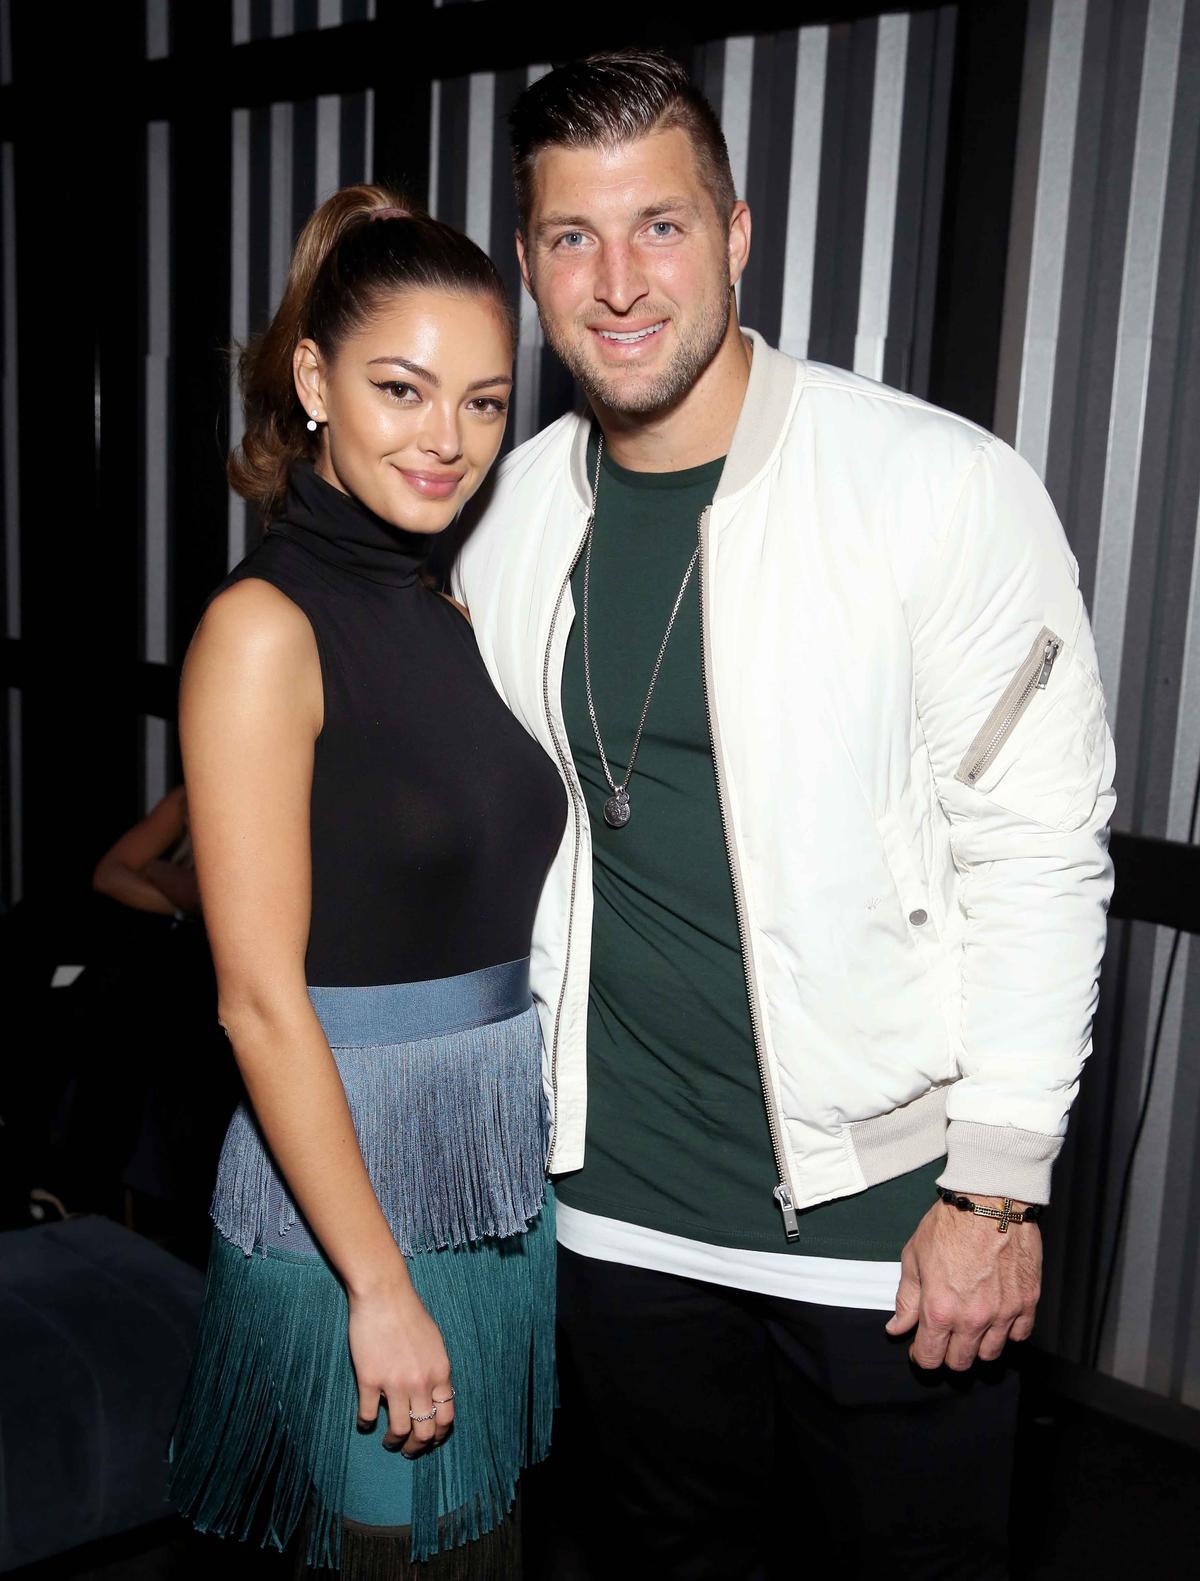 Demi-Leigh Nel-Peters and Tim Tebow attend DIRECTV Super Saturday Night 2019 at Atlantic Station on Feb. 2, 2019, in Atlanta, Georgia. (©Getty Images | <a href="https://www.gettyimages.com.mx/detail/fotograf%C3%ADa-de-noticias/demi-leigh-nel-peters-and-tim-tebow-attend-fotograf%C3%ADa-de-noticias/1093244808?adppopup=true">Robin Marchant</a>)